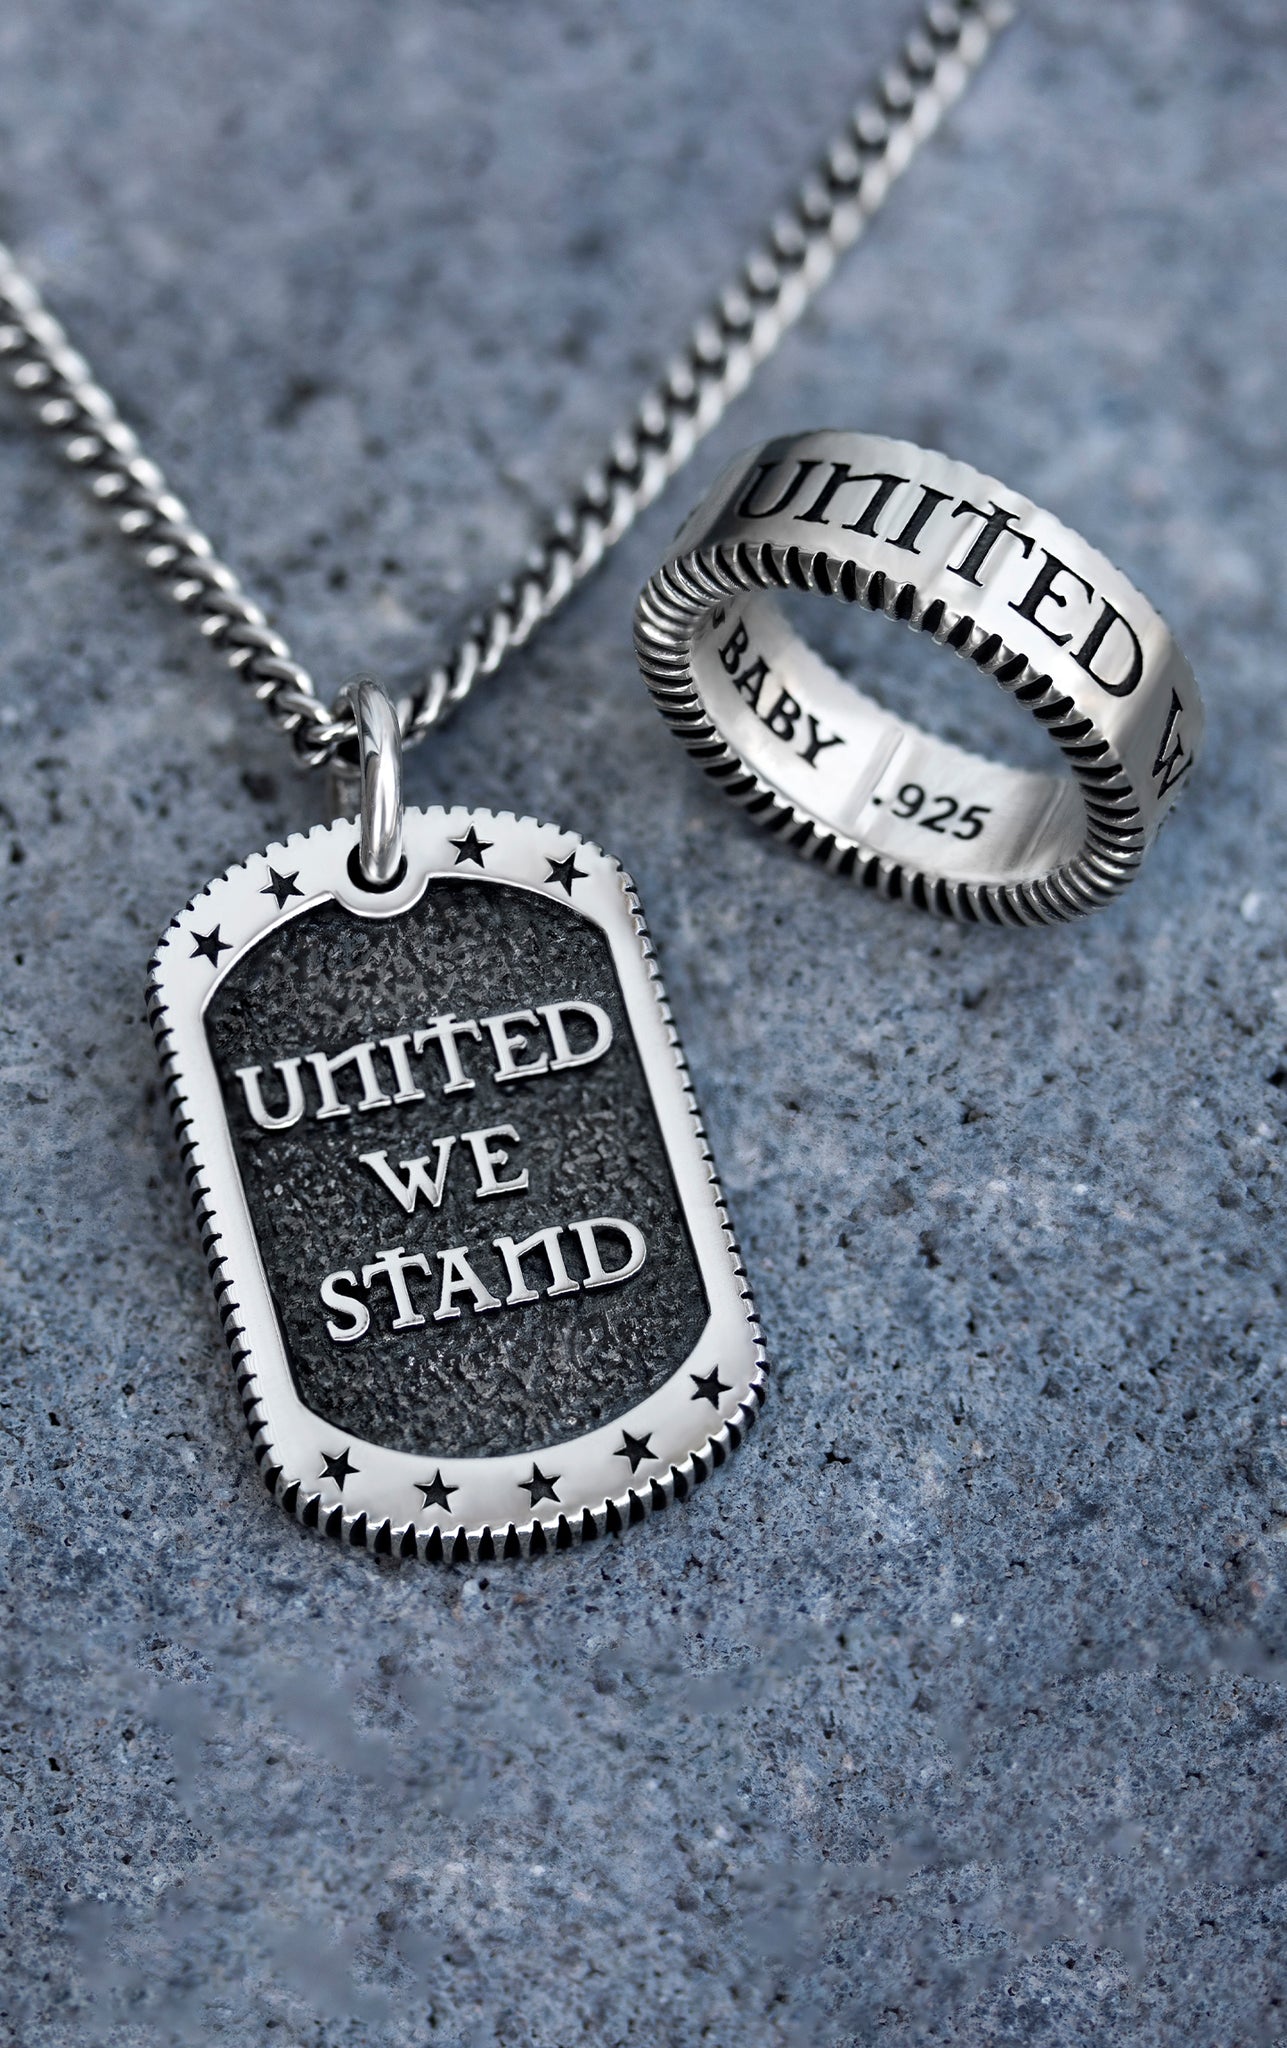 The "United We Stand" Ring